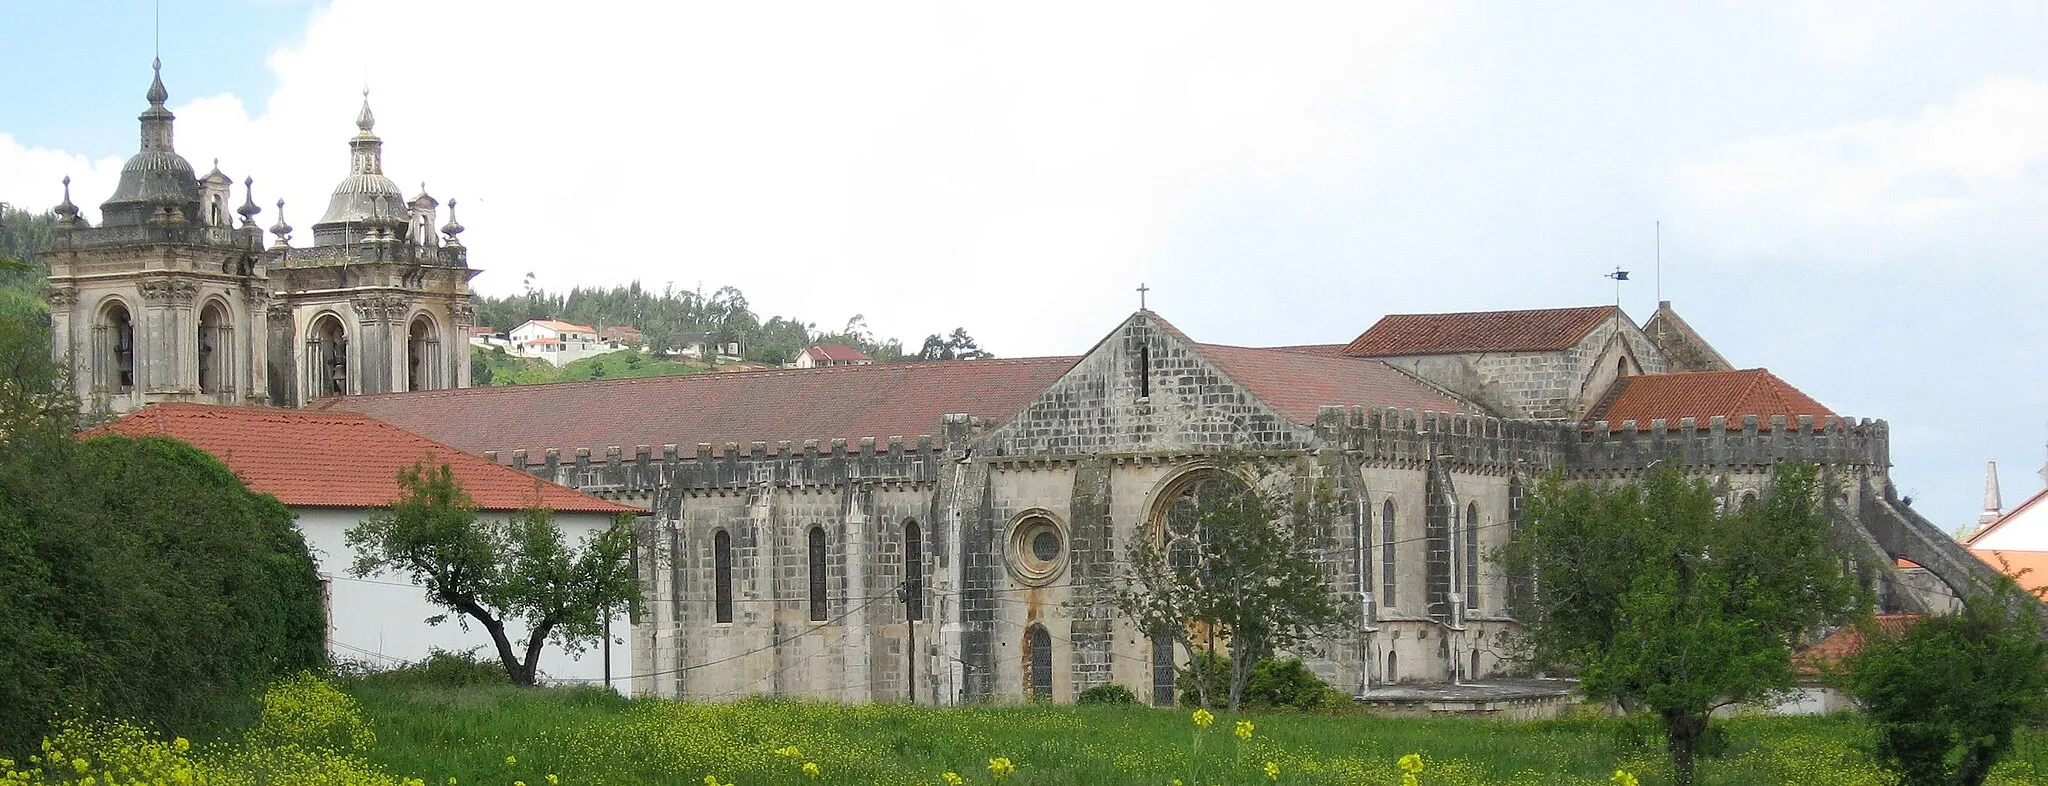 Photo showing: Mosteiro de Alcobaça, church with transept, from the south